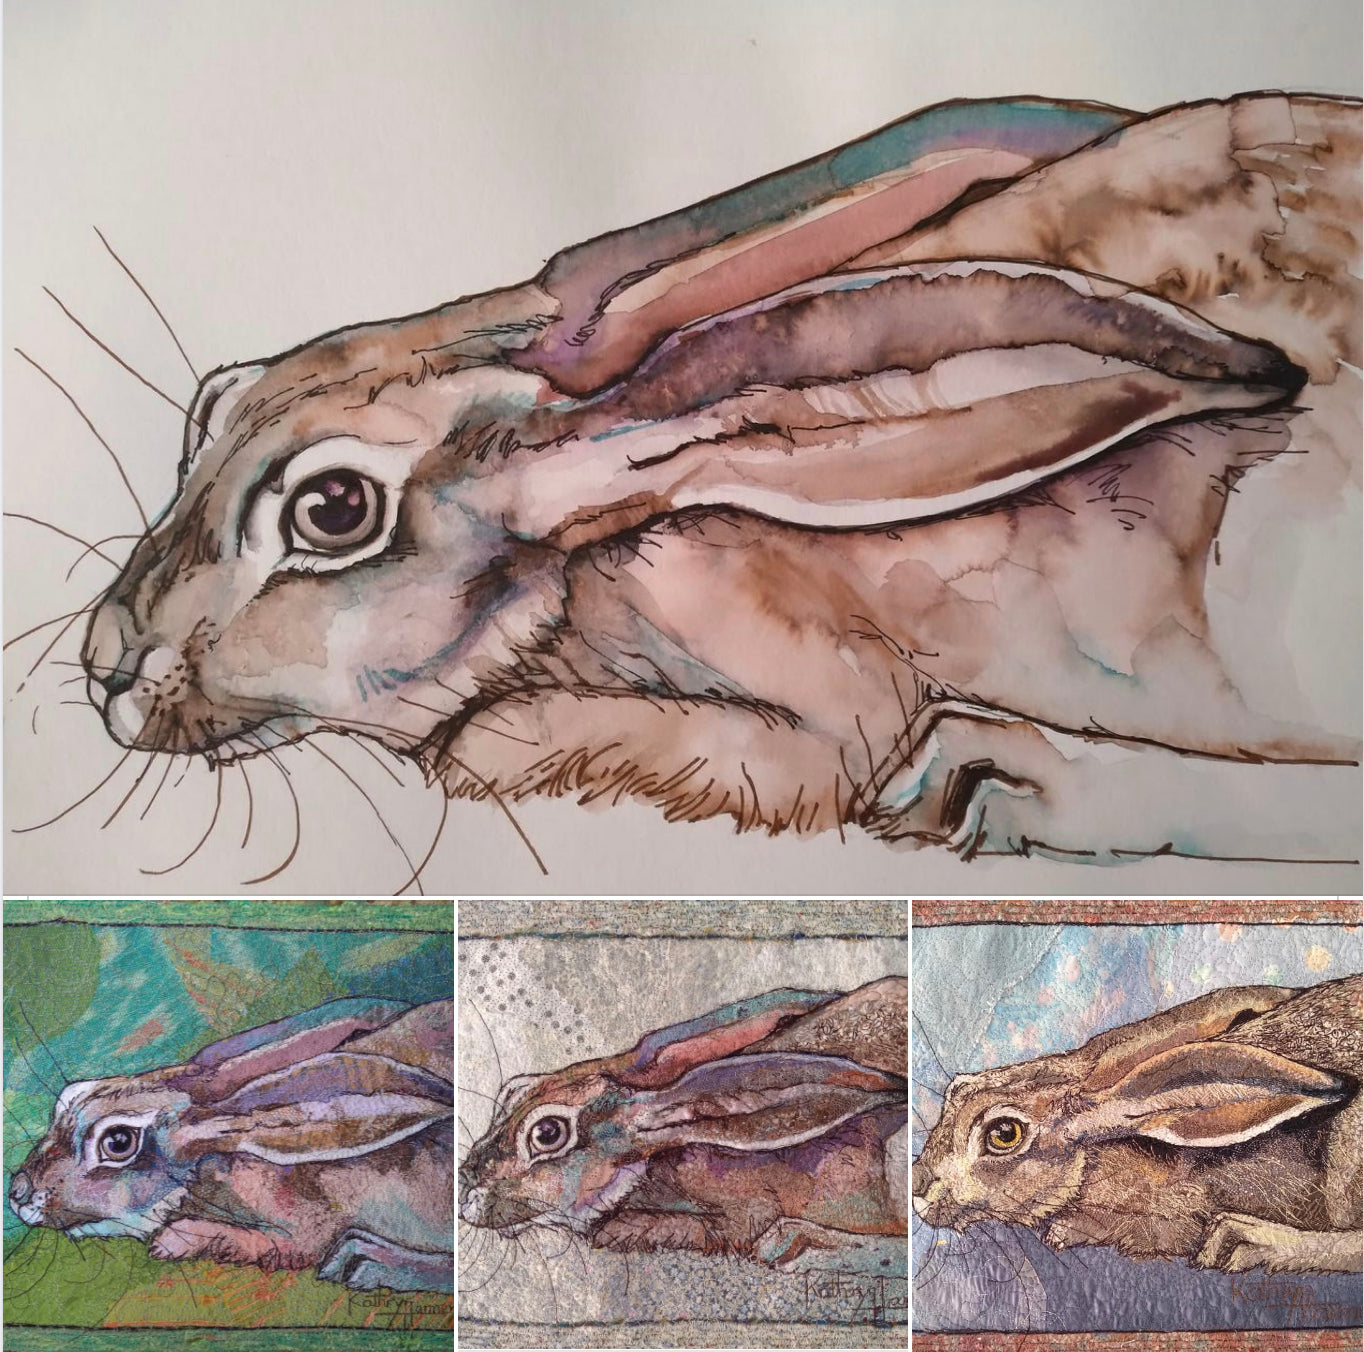 Workshop in a box - 2 Sew Textiles - Kathryn Harmer Fox Hare topic